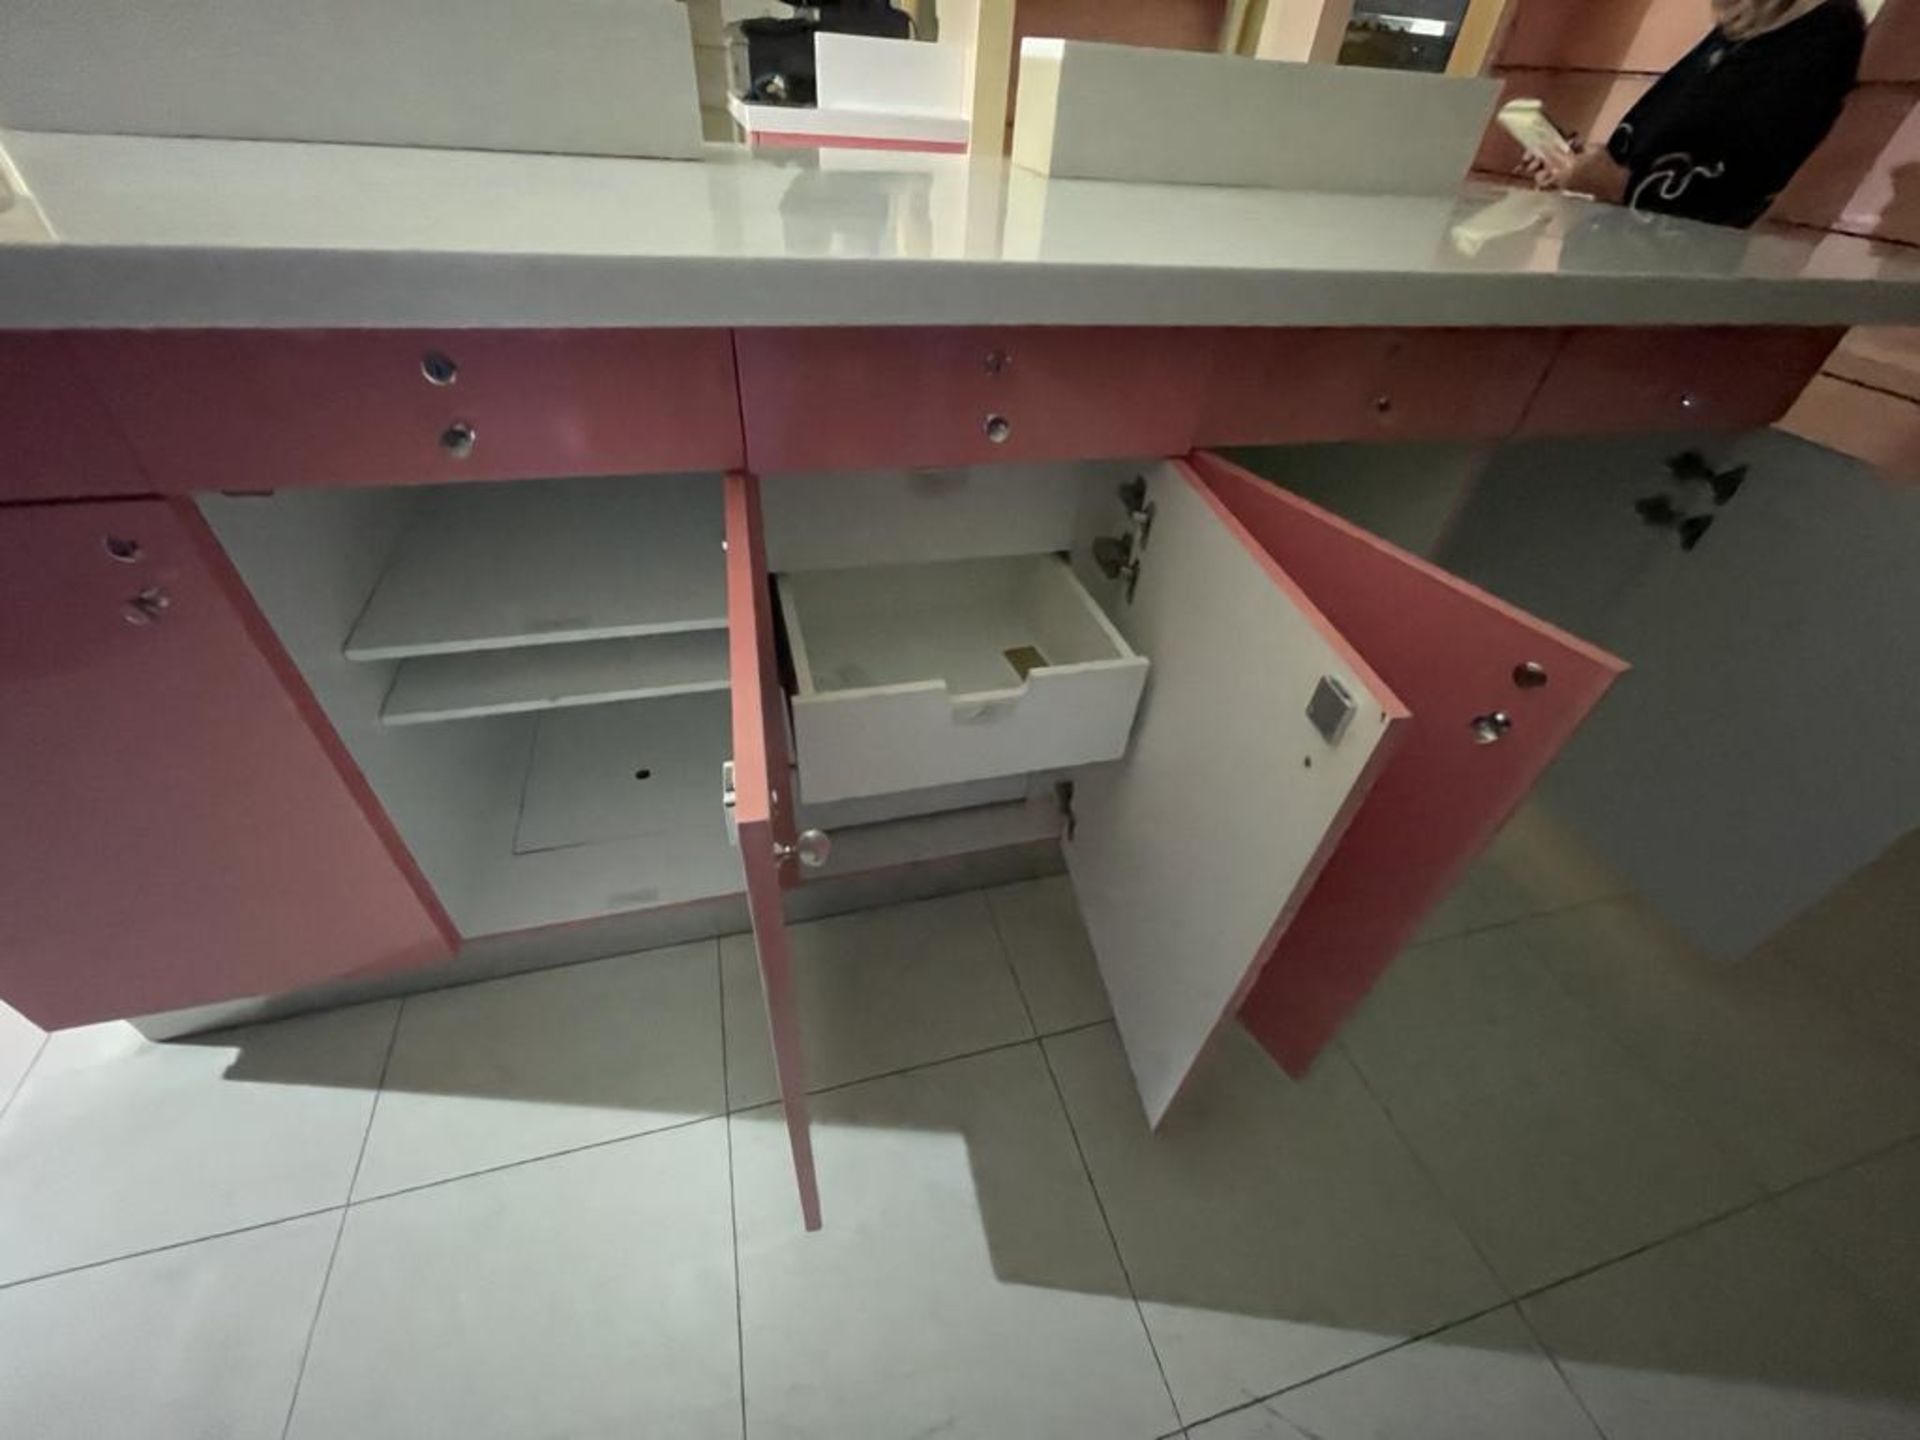 1 x Benefit Retail Testing Counter With Corian Worktop, Sample Holders and Bin Chute - Features Lots - Image 5 of 19